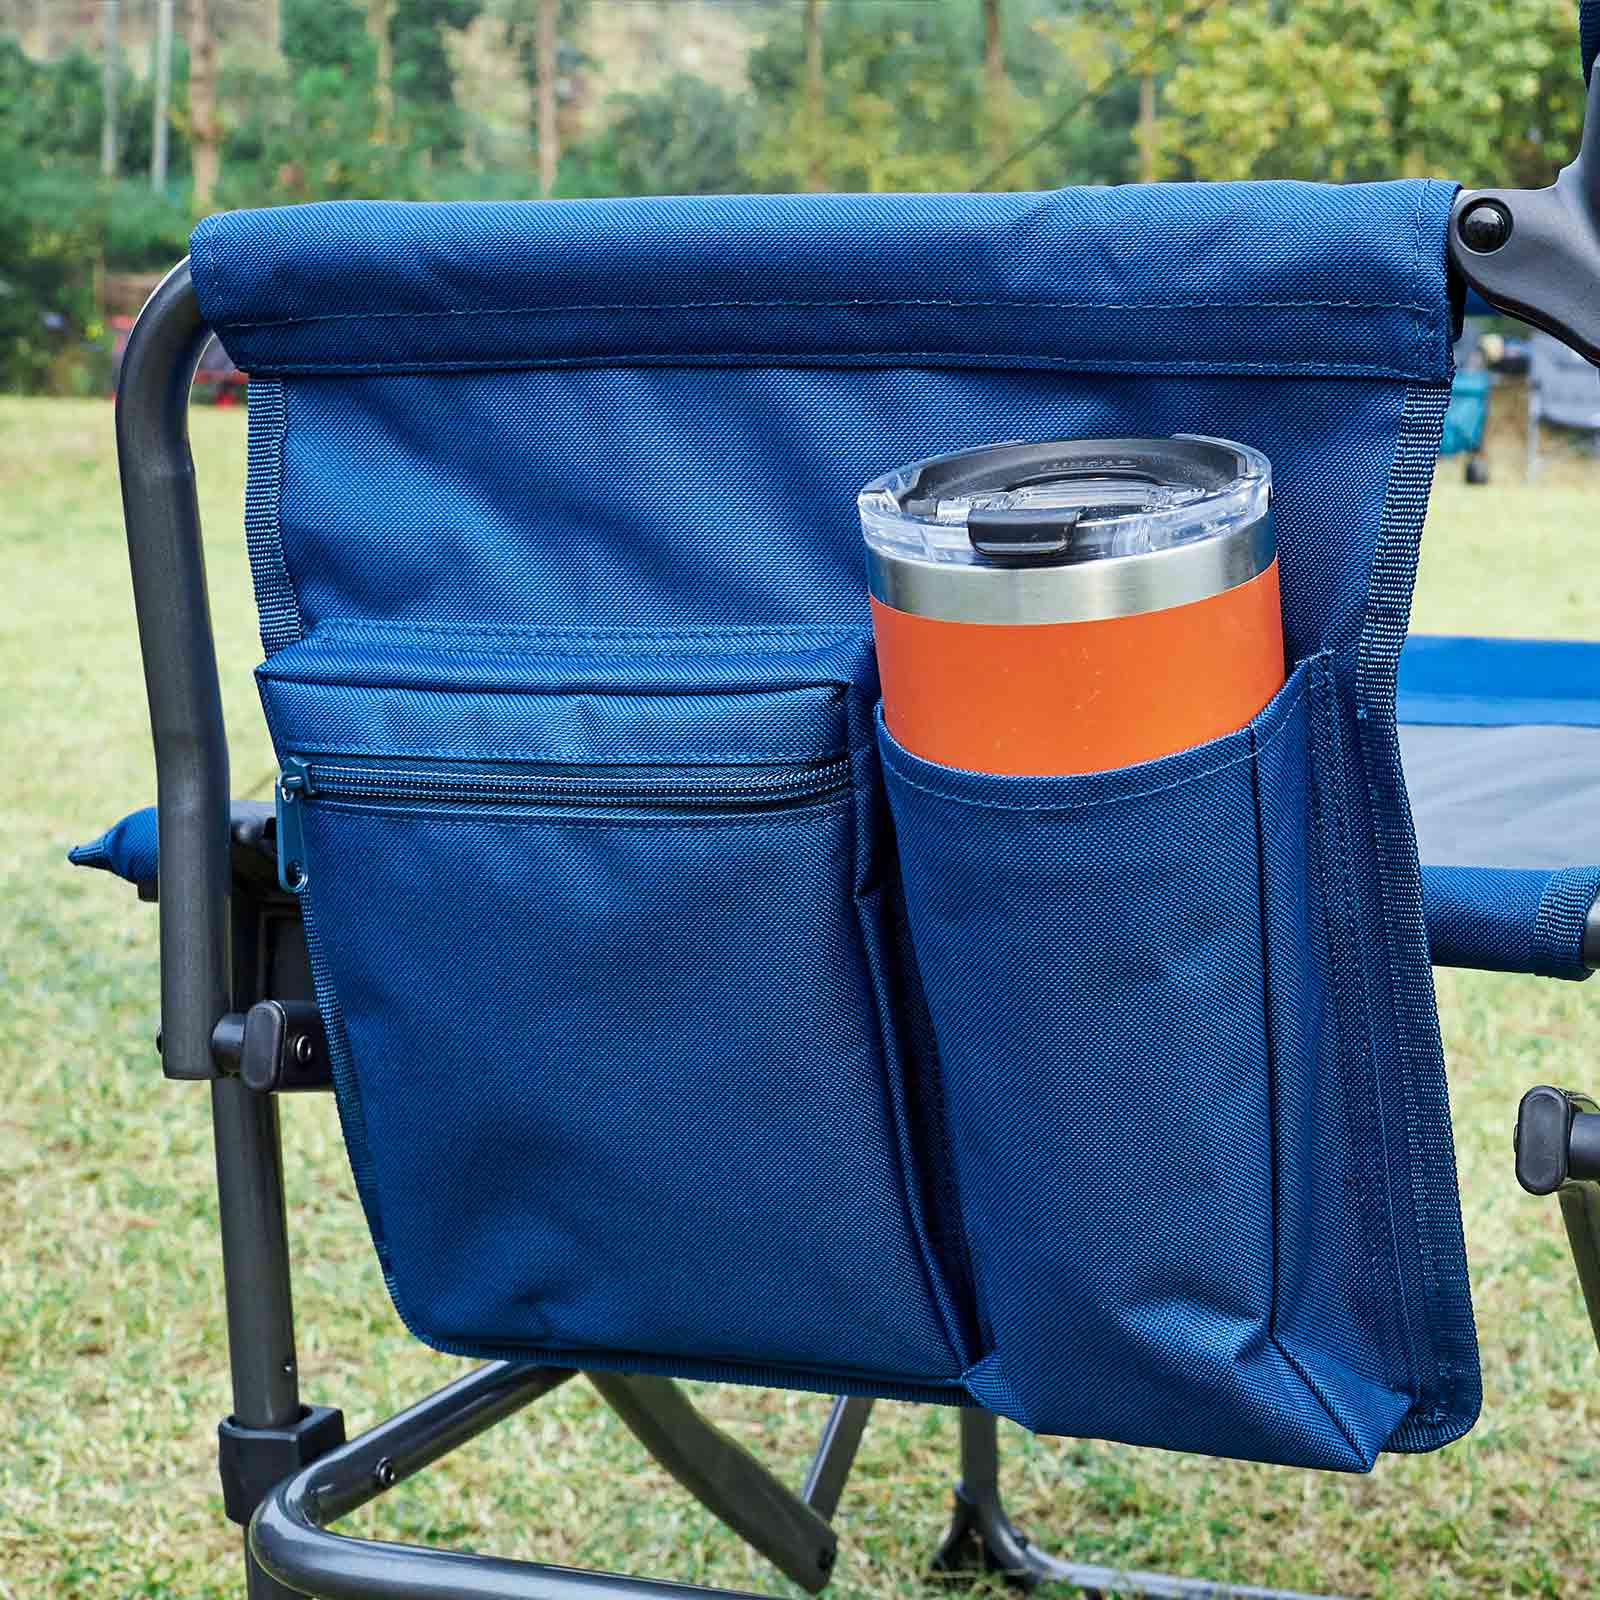 Compact Camping Directors Chair